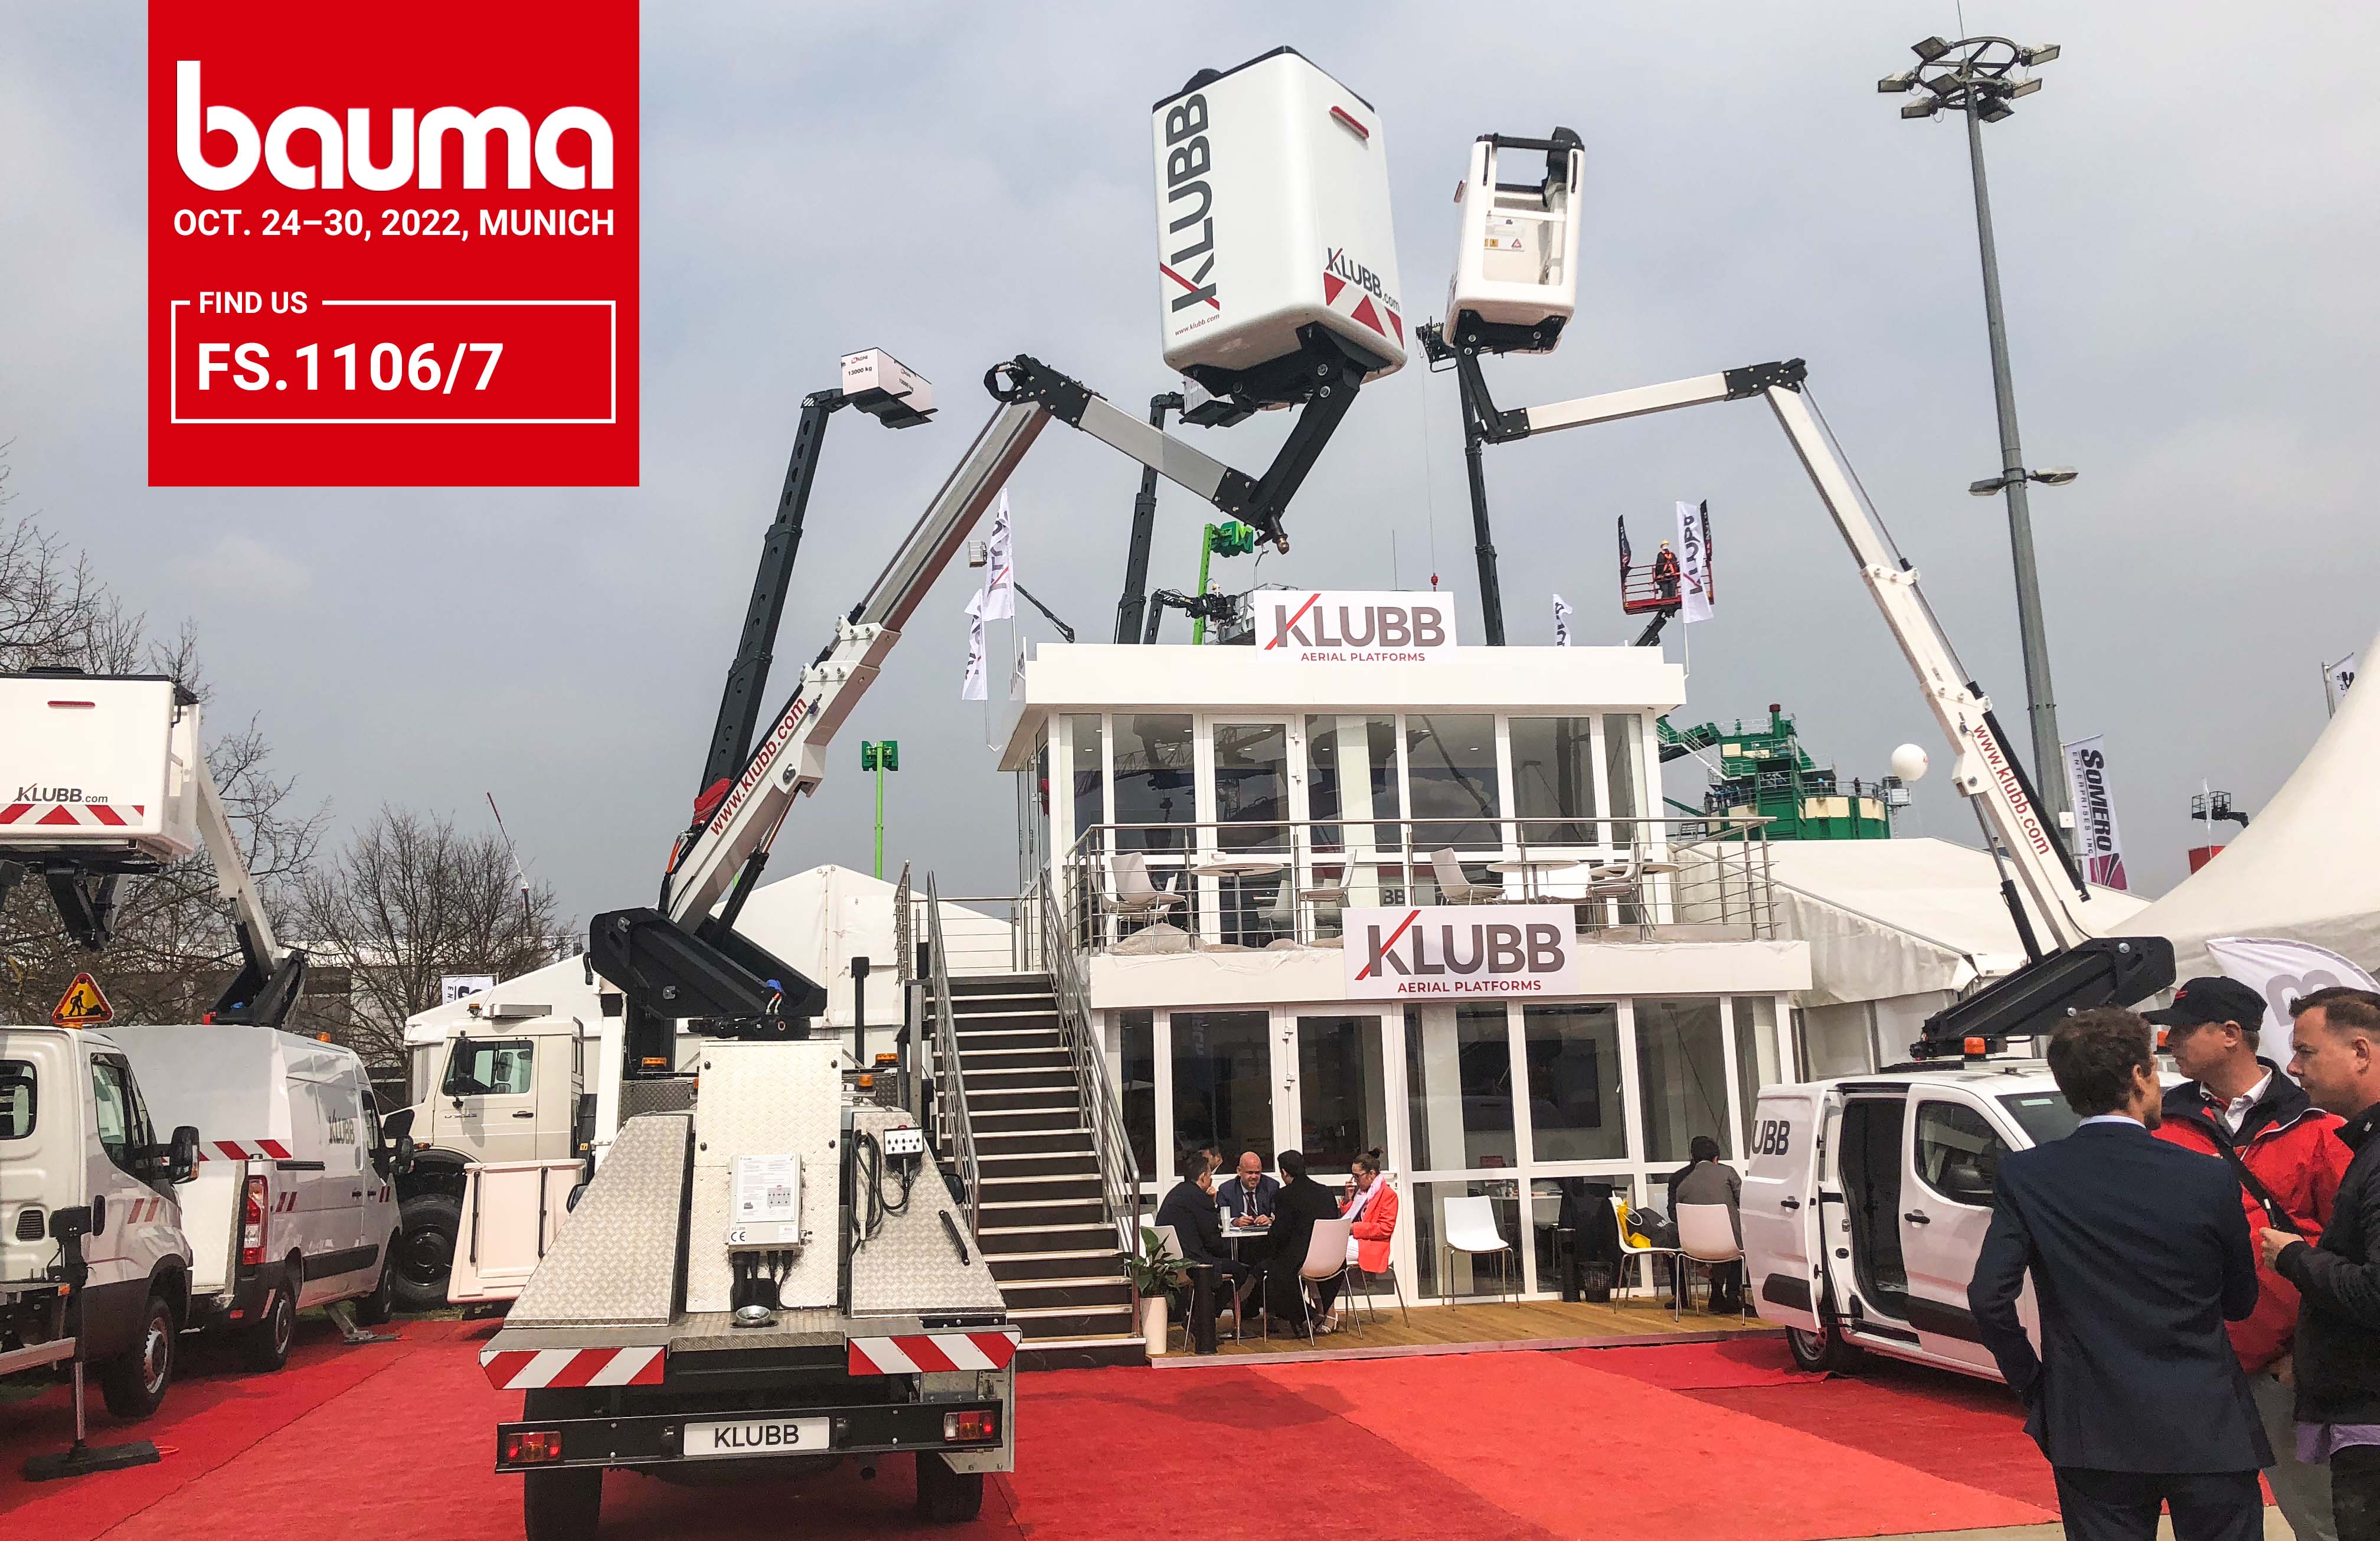 An unmissable event, BAUMA reopens its doors!